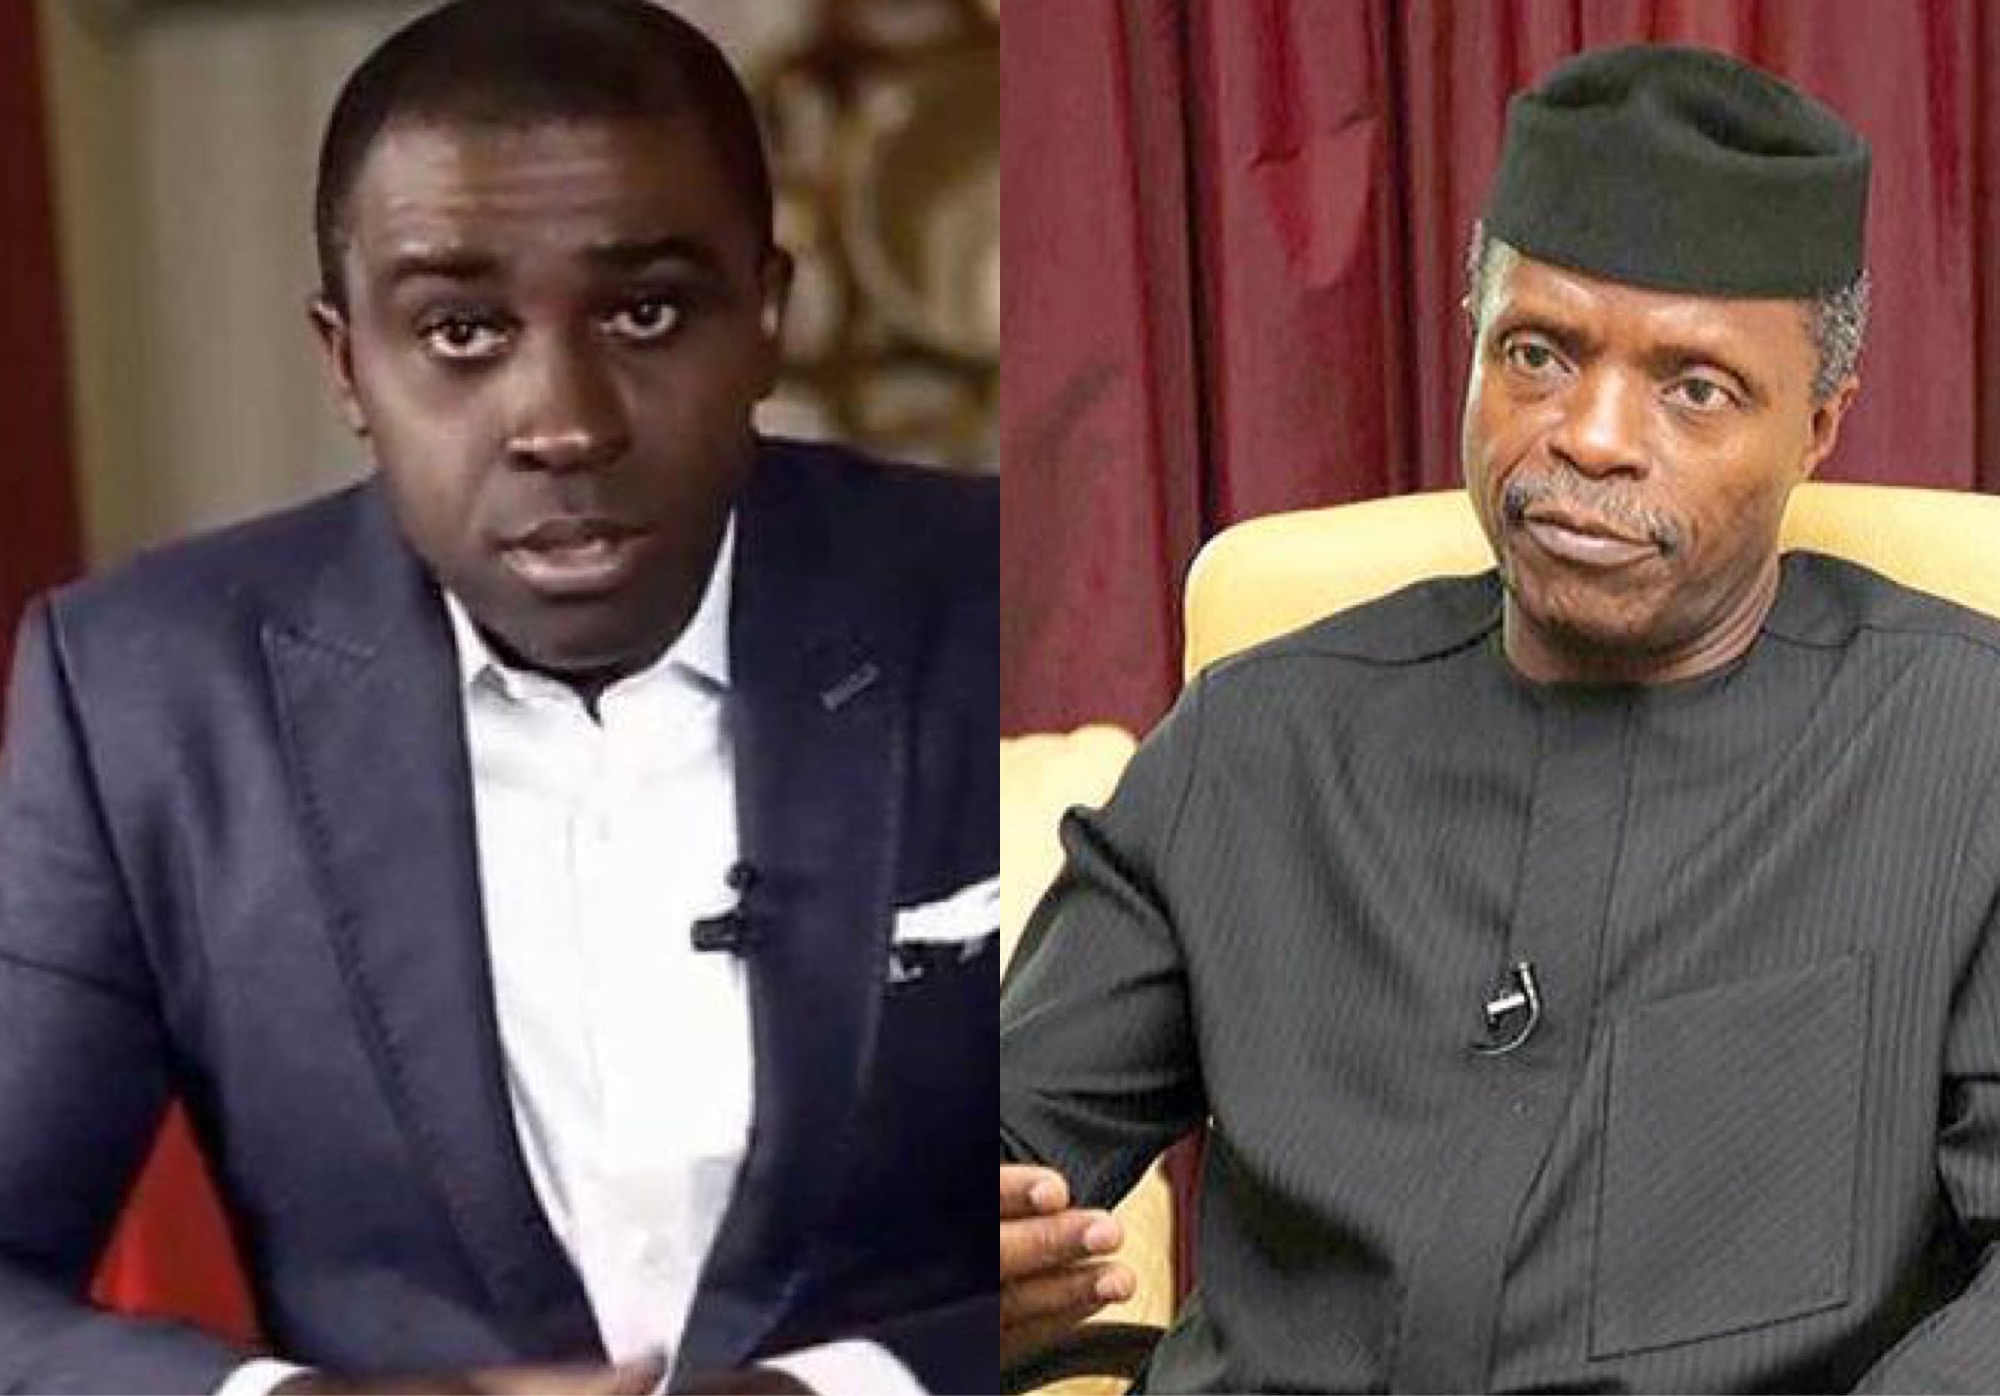 “You Are One Of The Disappointments We Have Seen This Year” – Frank Edoho Knocks Osinbajo